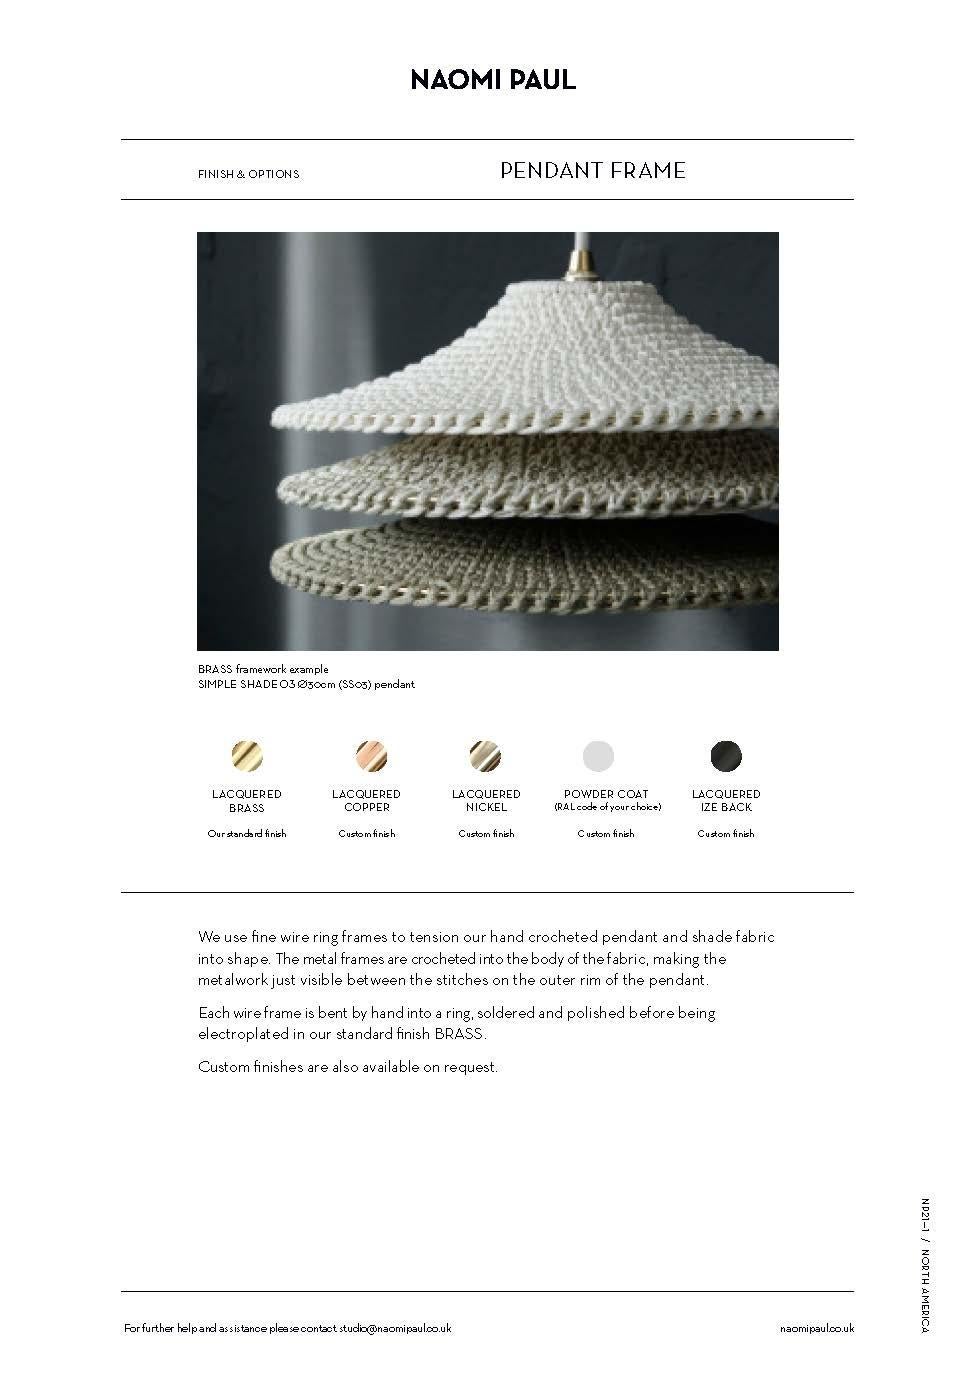 Metalwork BAMBOO SOLITAIRE 03 Pendant Light Ø50cm/19.7in, Hand Crocheted in Bamboo Paper